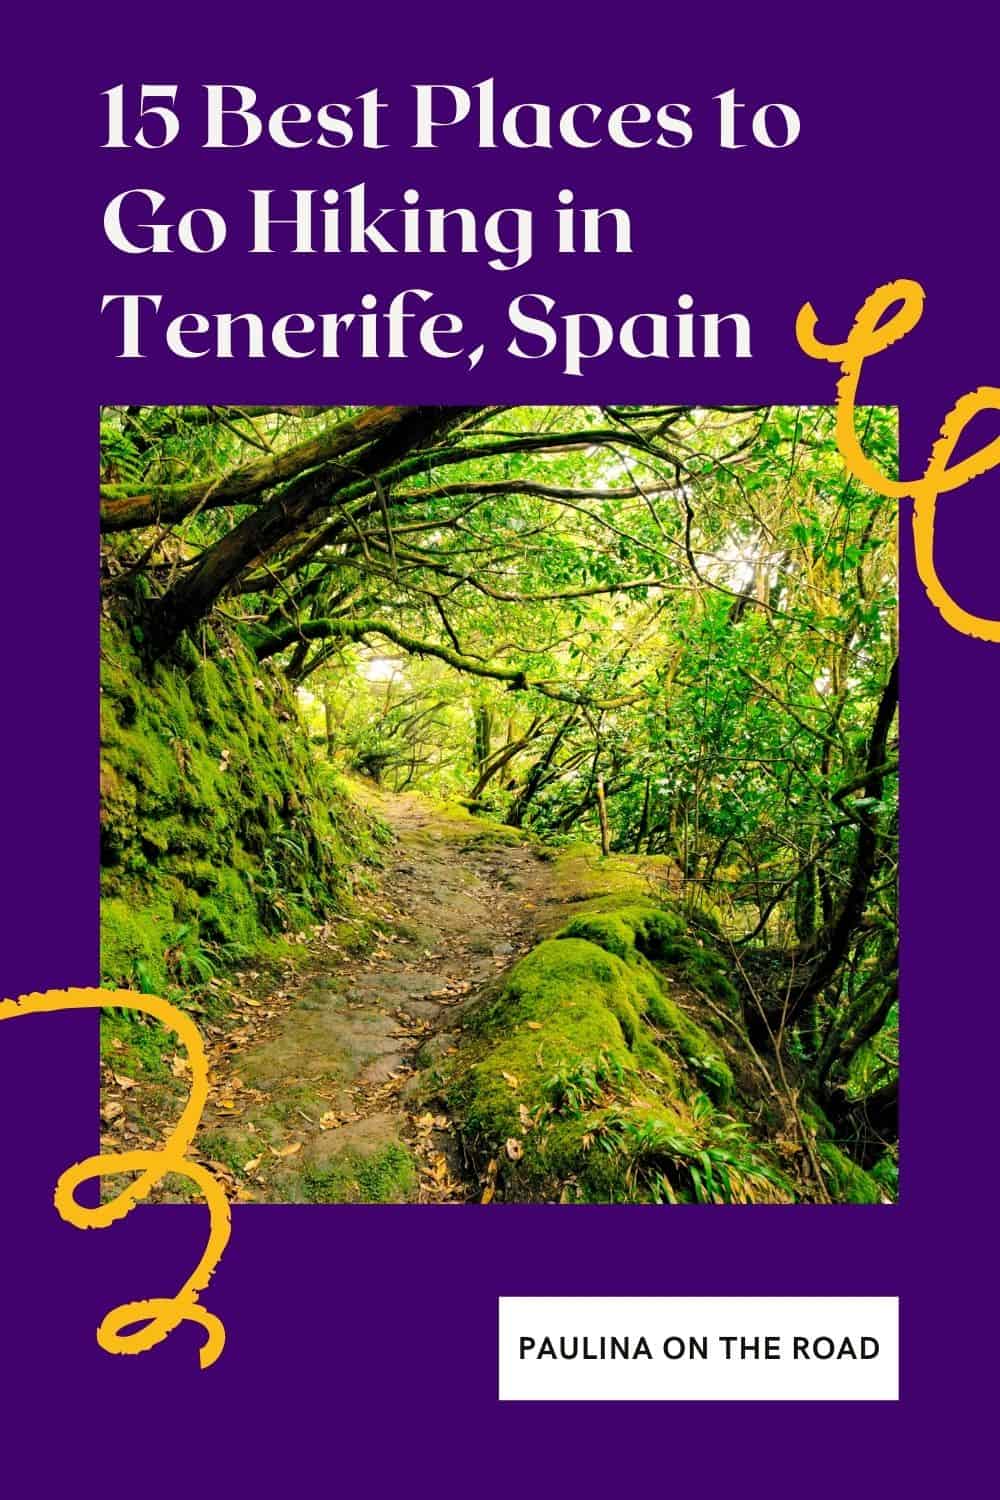 The natural beauty of Tenerife's landscapes makes this Spanish island one of the top hiking destinations in Europe. The hiking trails in Tenerife are one of the top reasons to visit the island. This guide has all the best hikes in Tenerife to ensure you make the of your holiday and see all the stunning views. Includes hikes around Teide, the Anaga region, and some lesser-known hikes. #Tenerife #Spain #Hiking #HikingTenerife #MountTeide #Anaga #Chinyero #PuntaDelHidalgo #Europe #MascaValley